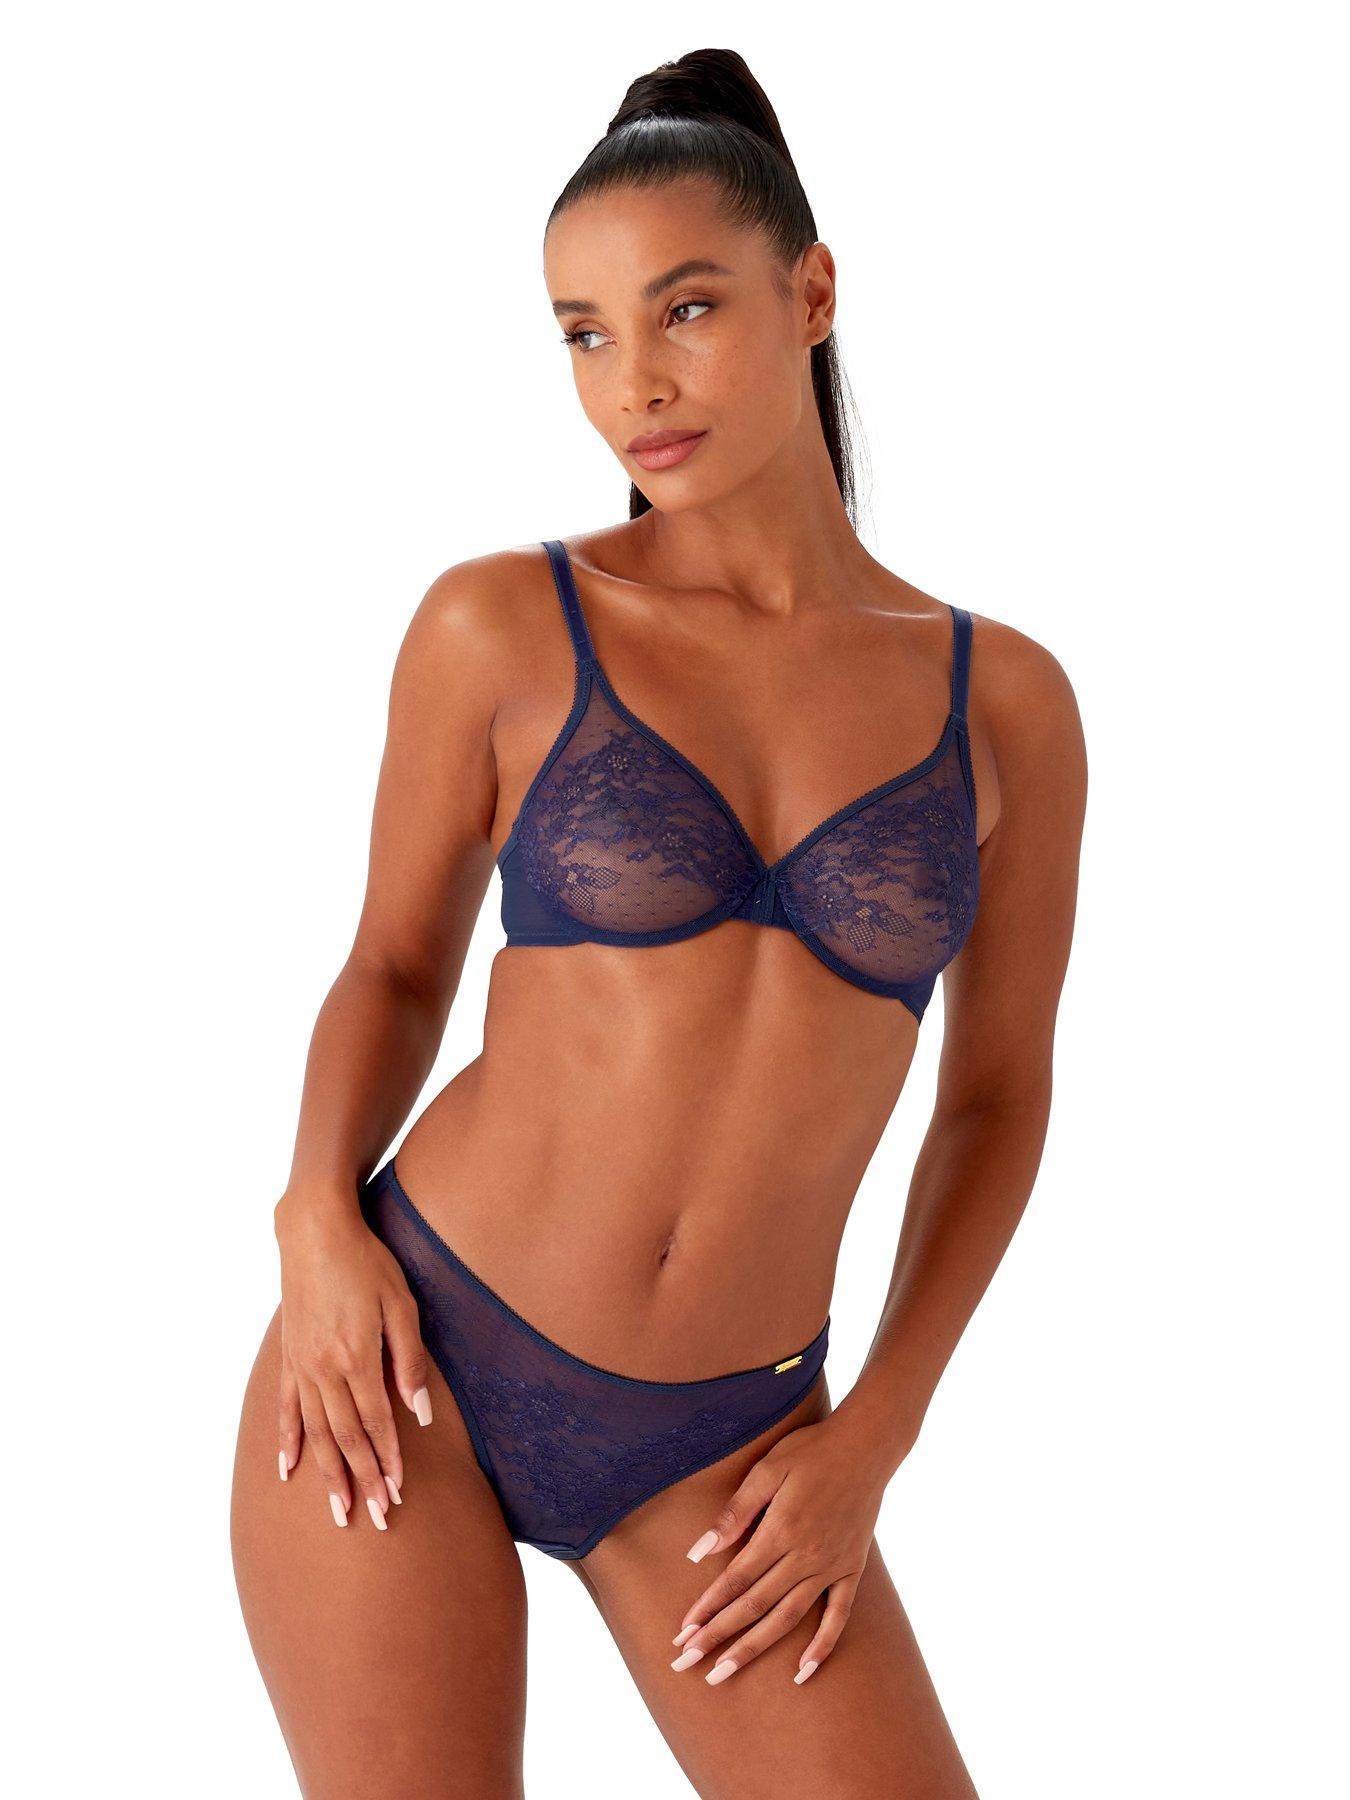 Underwired Lace Sheer Non Padded Bra 1052